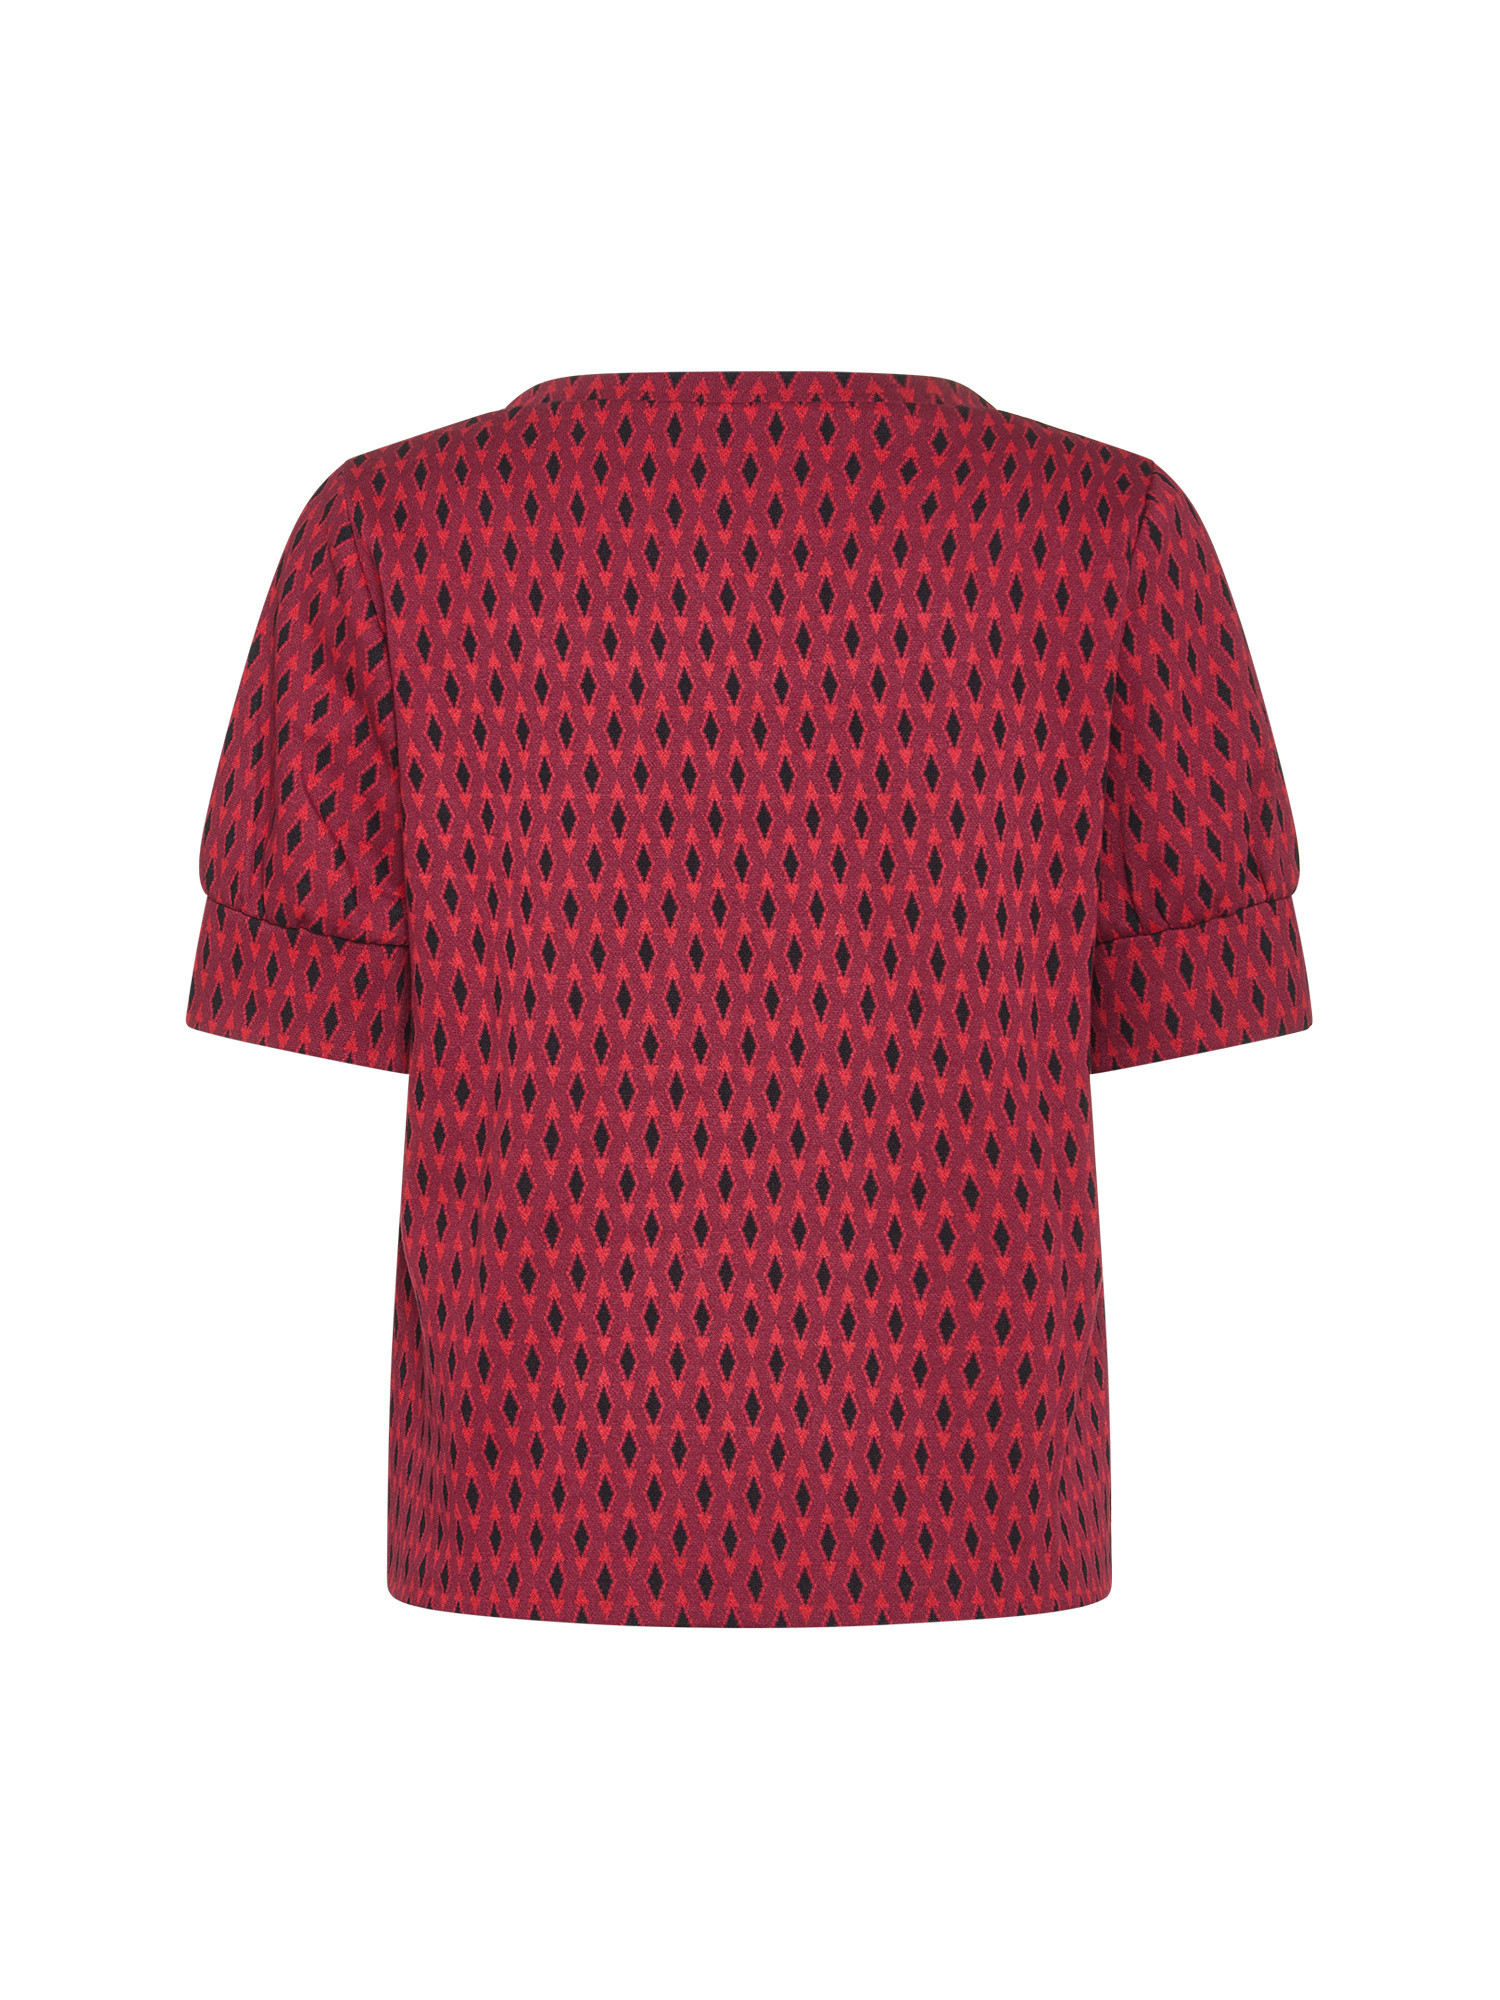 Koan - T-shirt con fantasia a rombi, Rosso, large image number 1